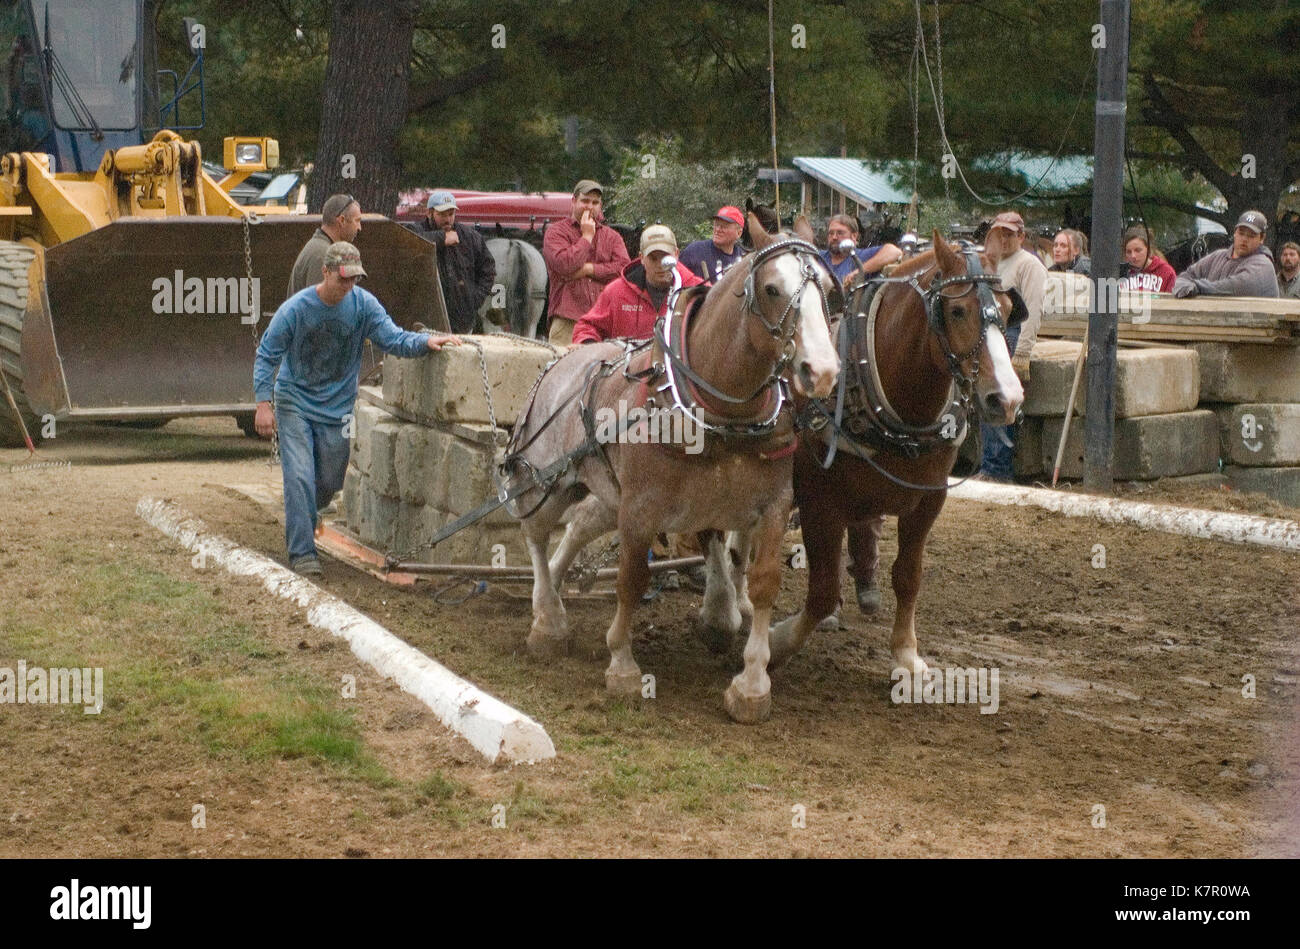 The Deerfield Fair - Deerfield, New Hampshire.  This team of work horses was pulling 4900 lbs.- USA Stock Photo